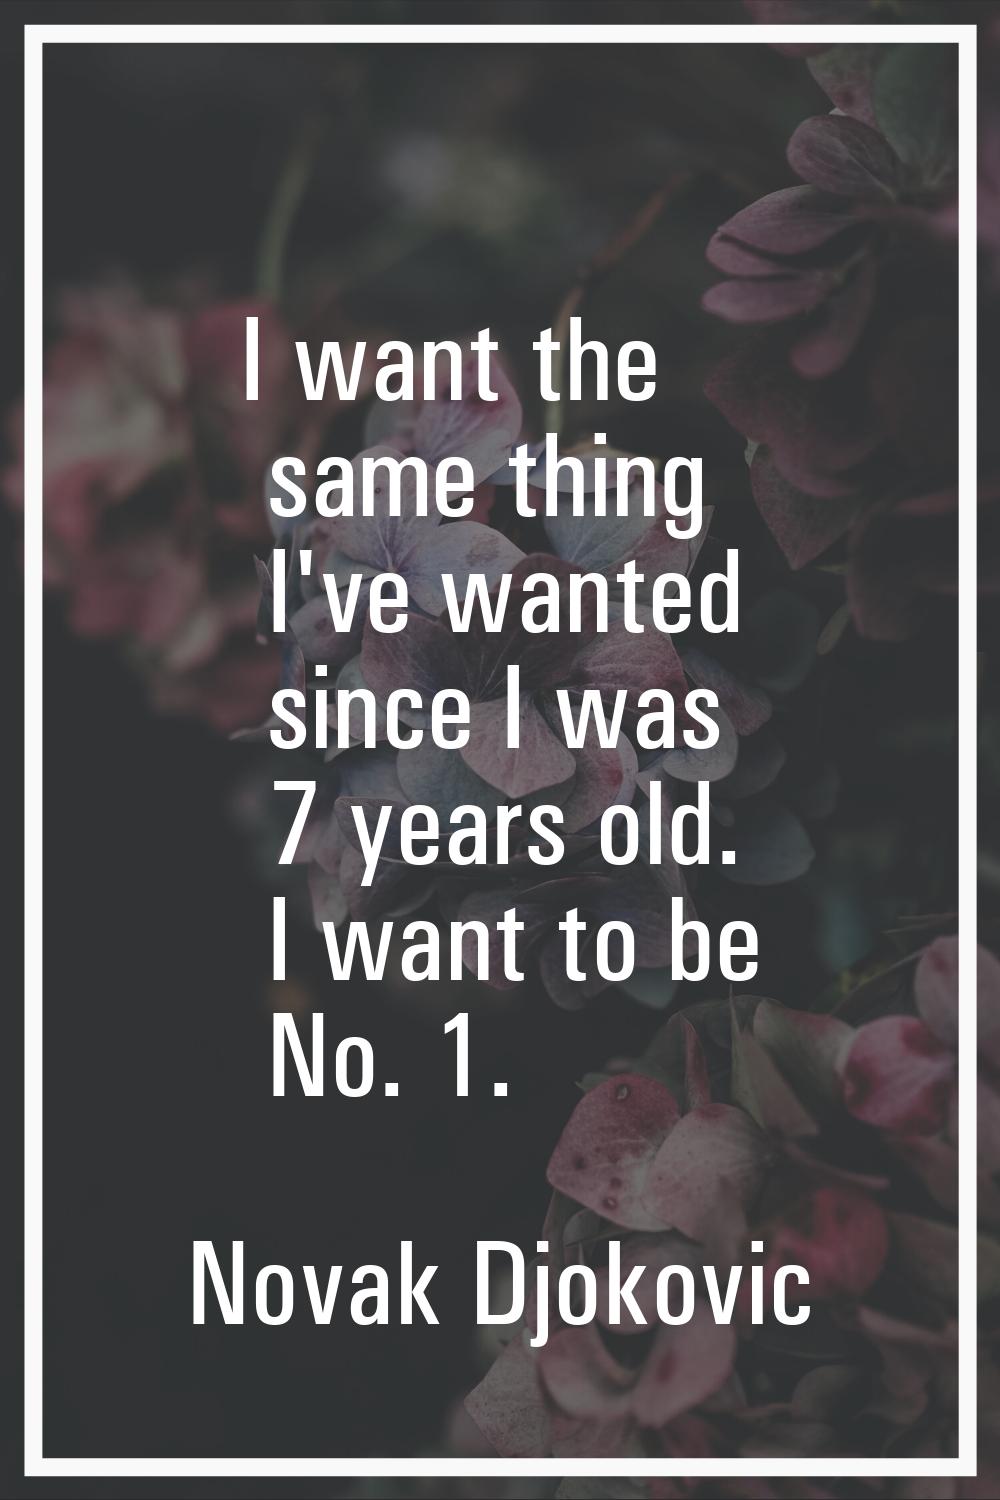 I want the same thing I've wanted since I was 7 years old. I want to be No. 1.